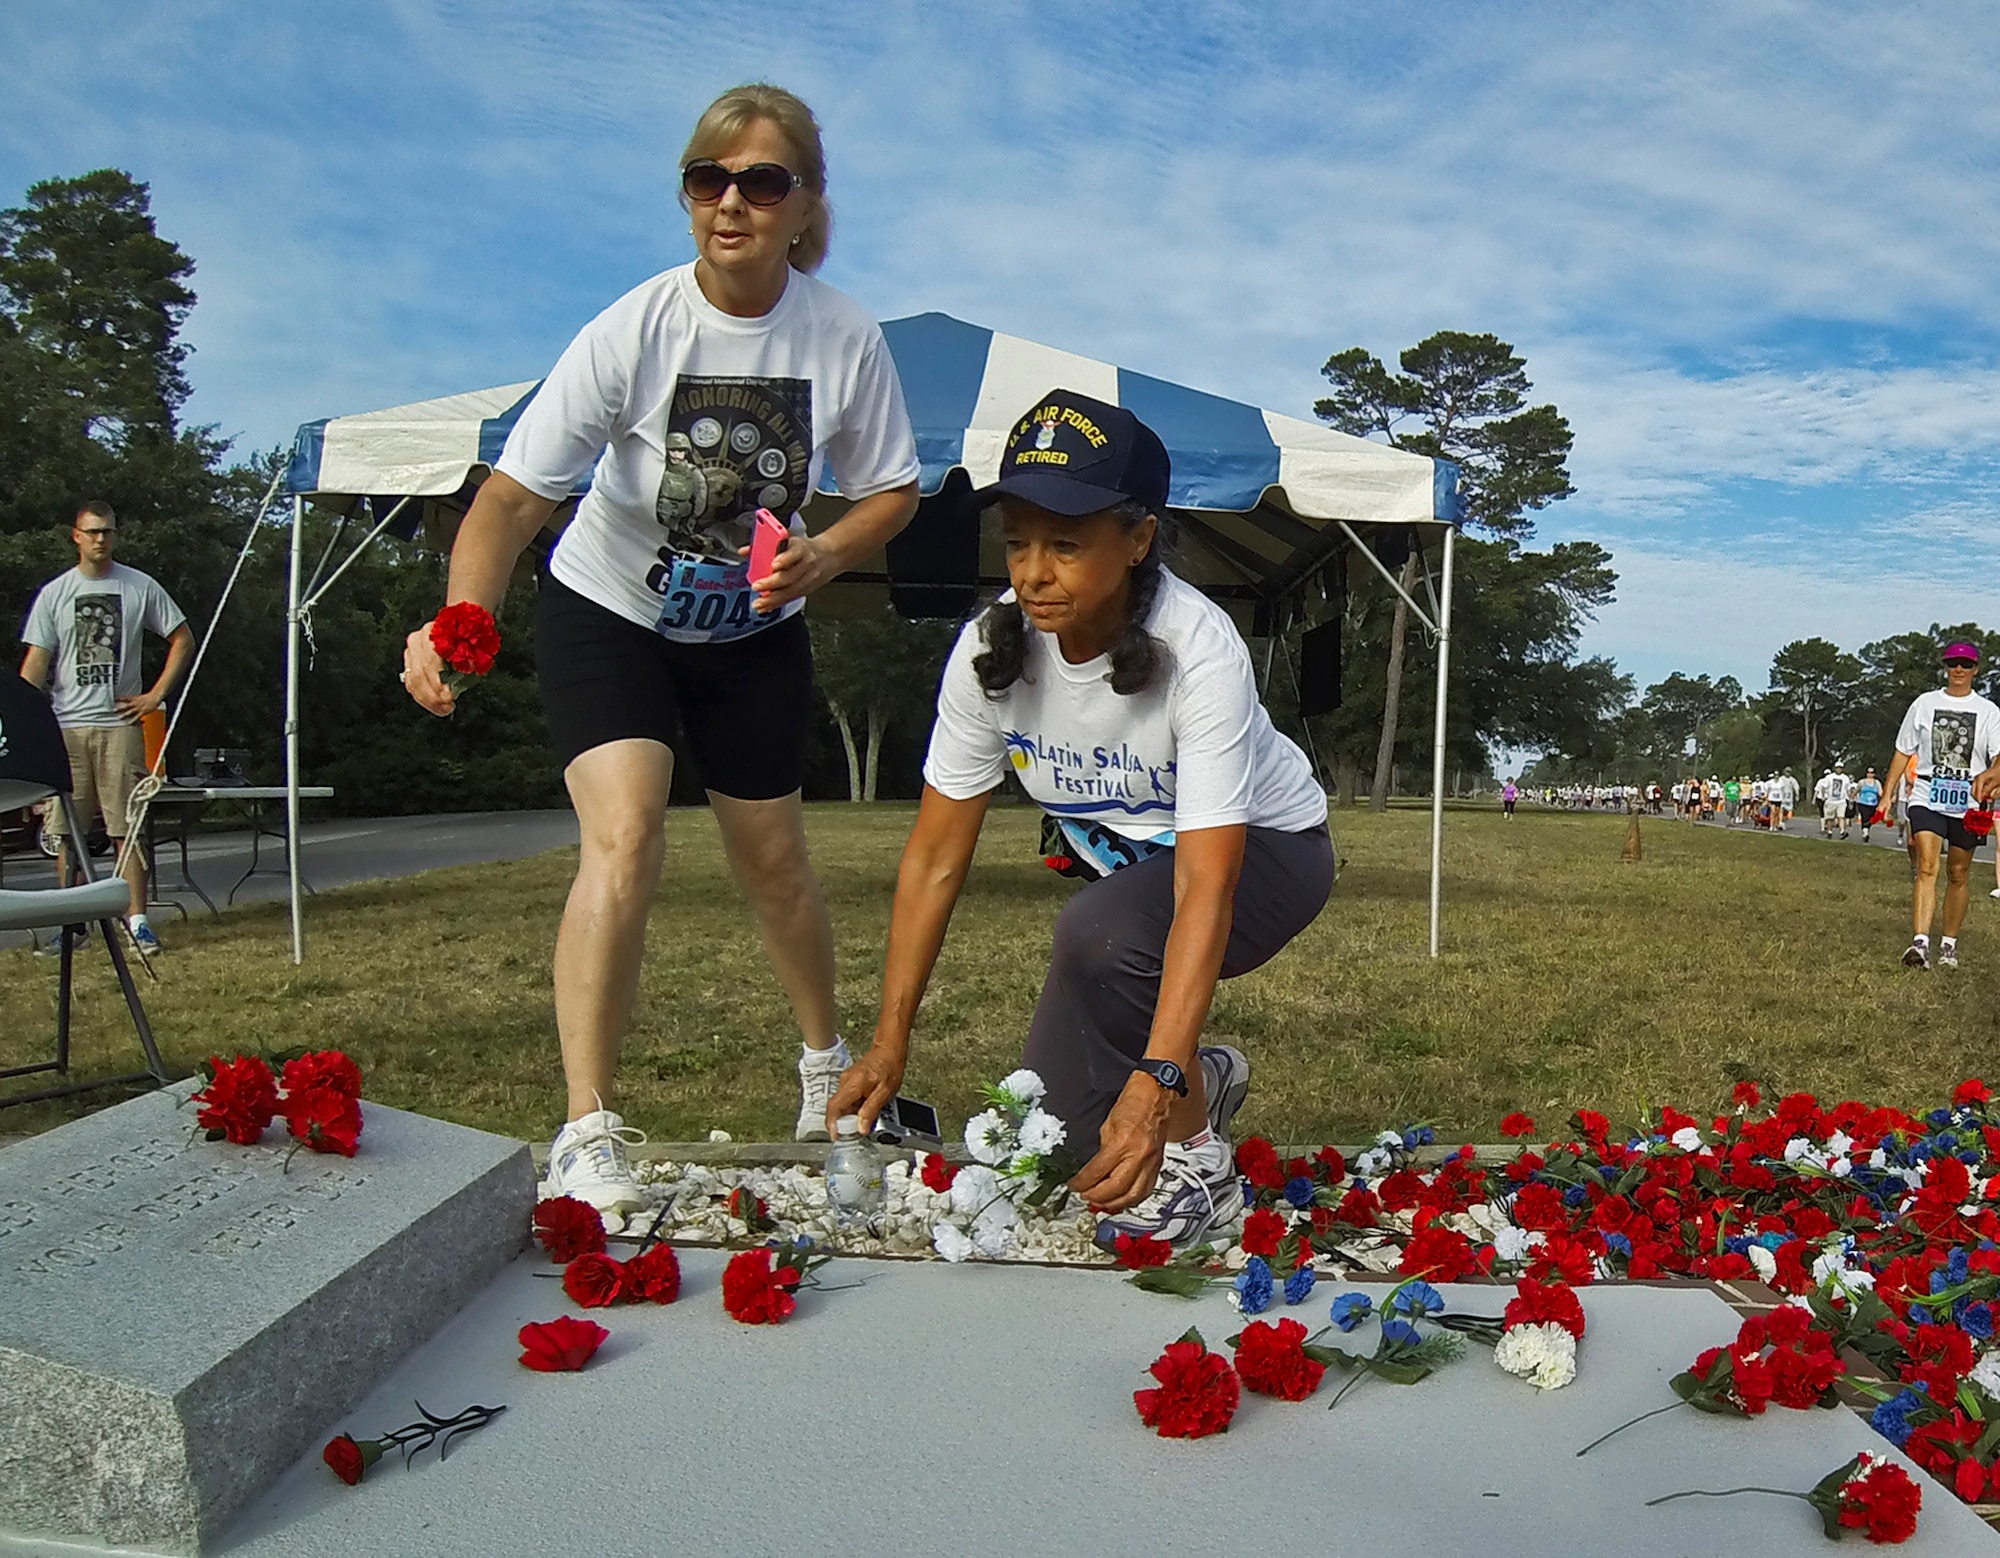 Joni LaFlamme (left) stops to honor the veterans by placing a flower on the memorial during the 28th annual Gate-to-Gate Run May 27 at Eglin Air Force Base, Fla. More than 1,500 people participated in the Memorial Day race.  Many of the runners paid their respects by dropping off flowers in front of the All Wars Memorial as they raced by.  (U.S. Air Force photo/Samuel King Jr.)